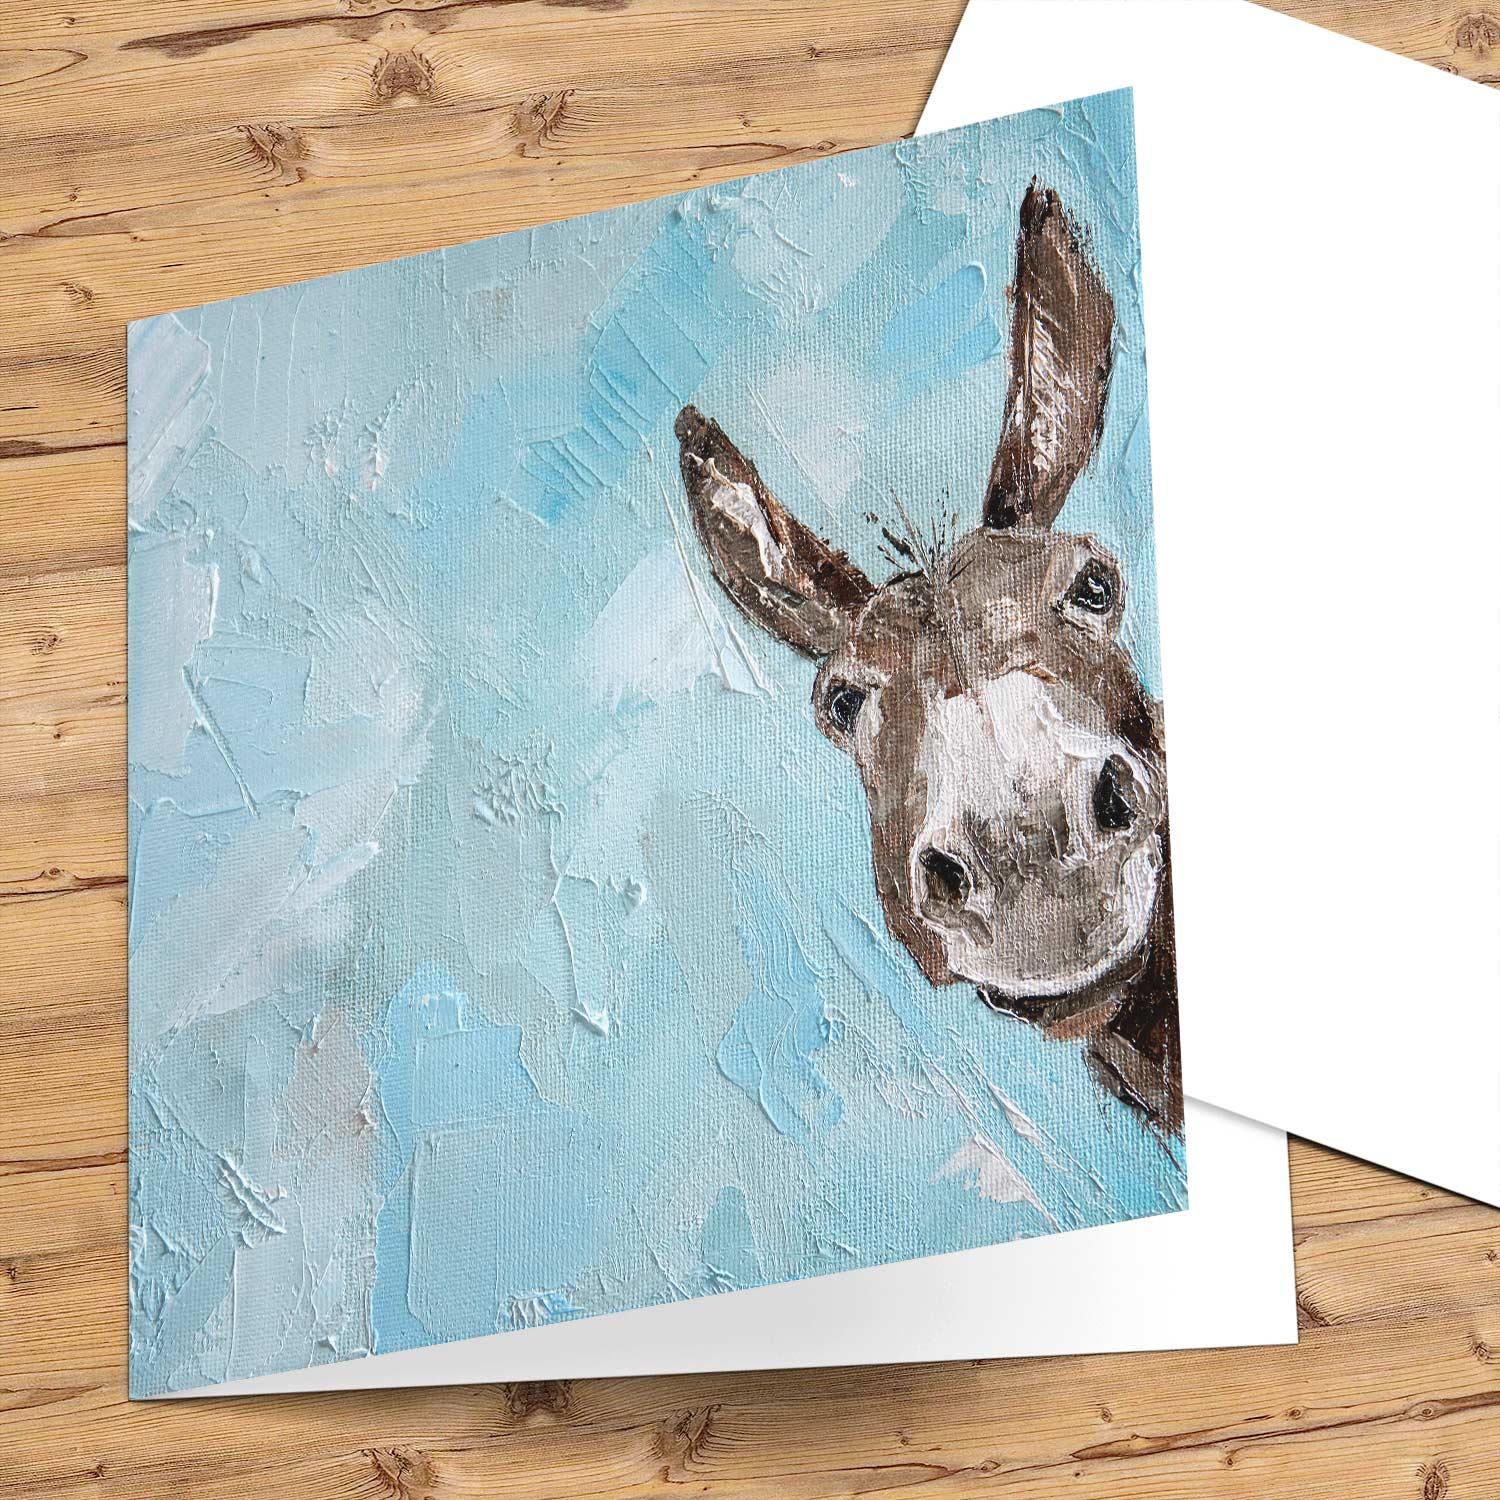 Curious Donkey from an original painting by Charlotte Strawbridge